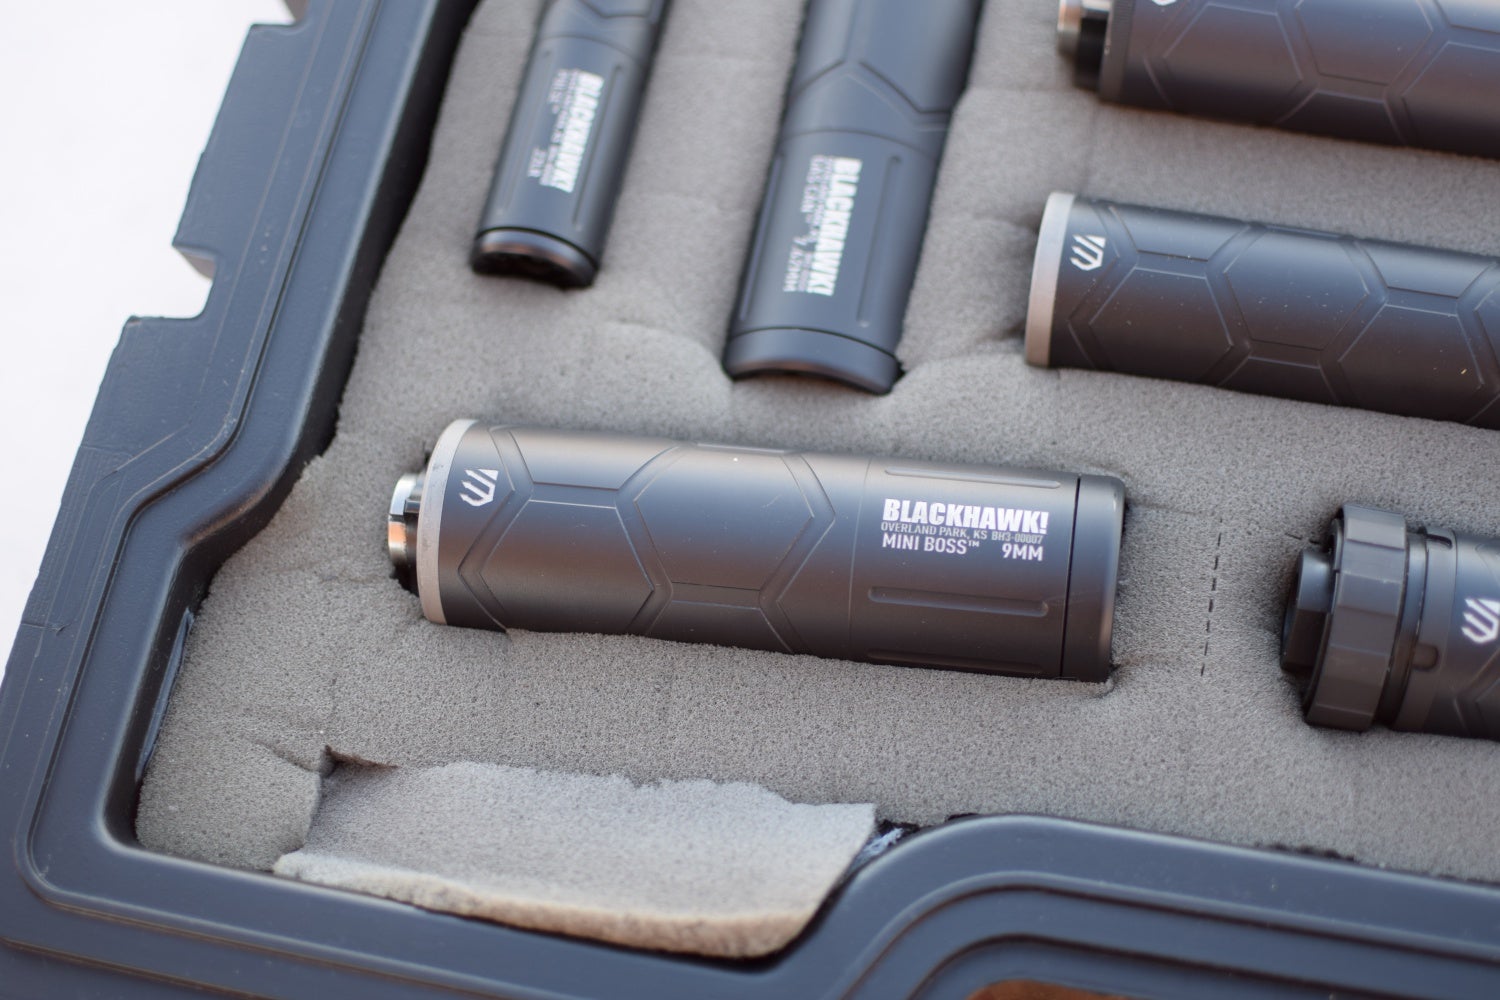 The Carnivore .300 Win Mag suppressor only weighs 9.6 oz and it is only 1.4...